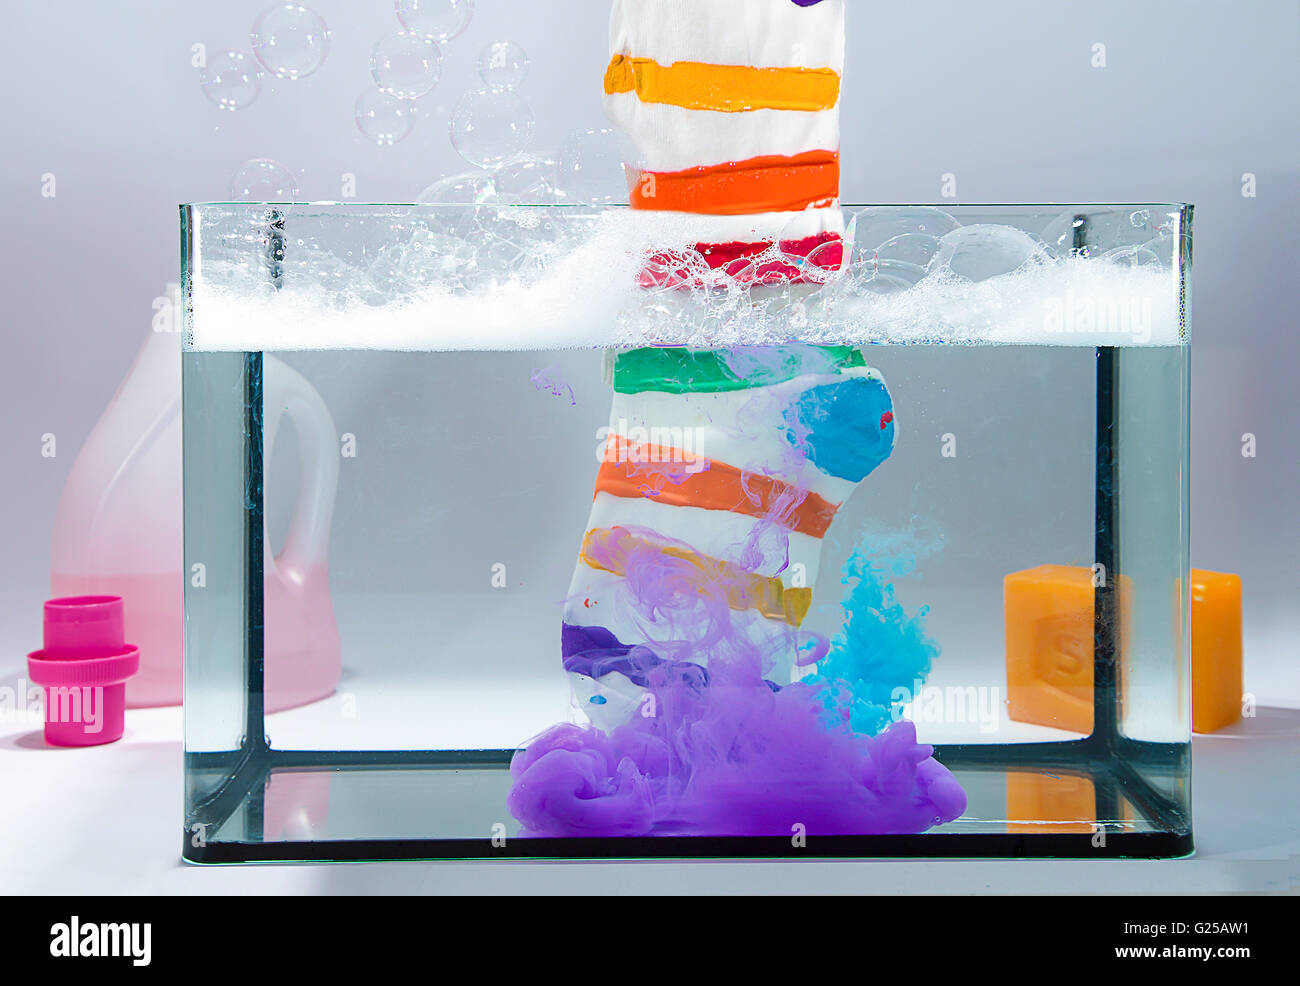 Multi-colored striped stock in tank of water with bleach Stock Photo